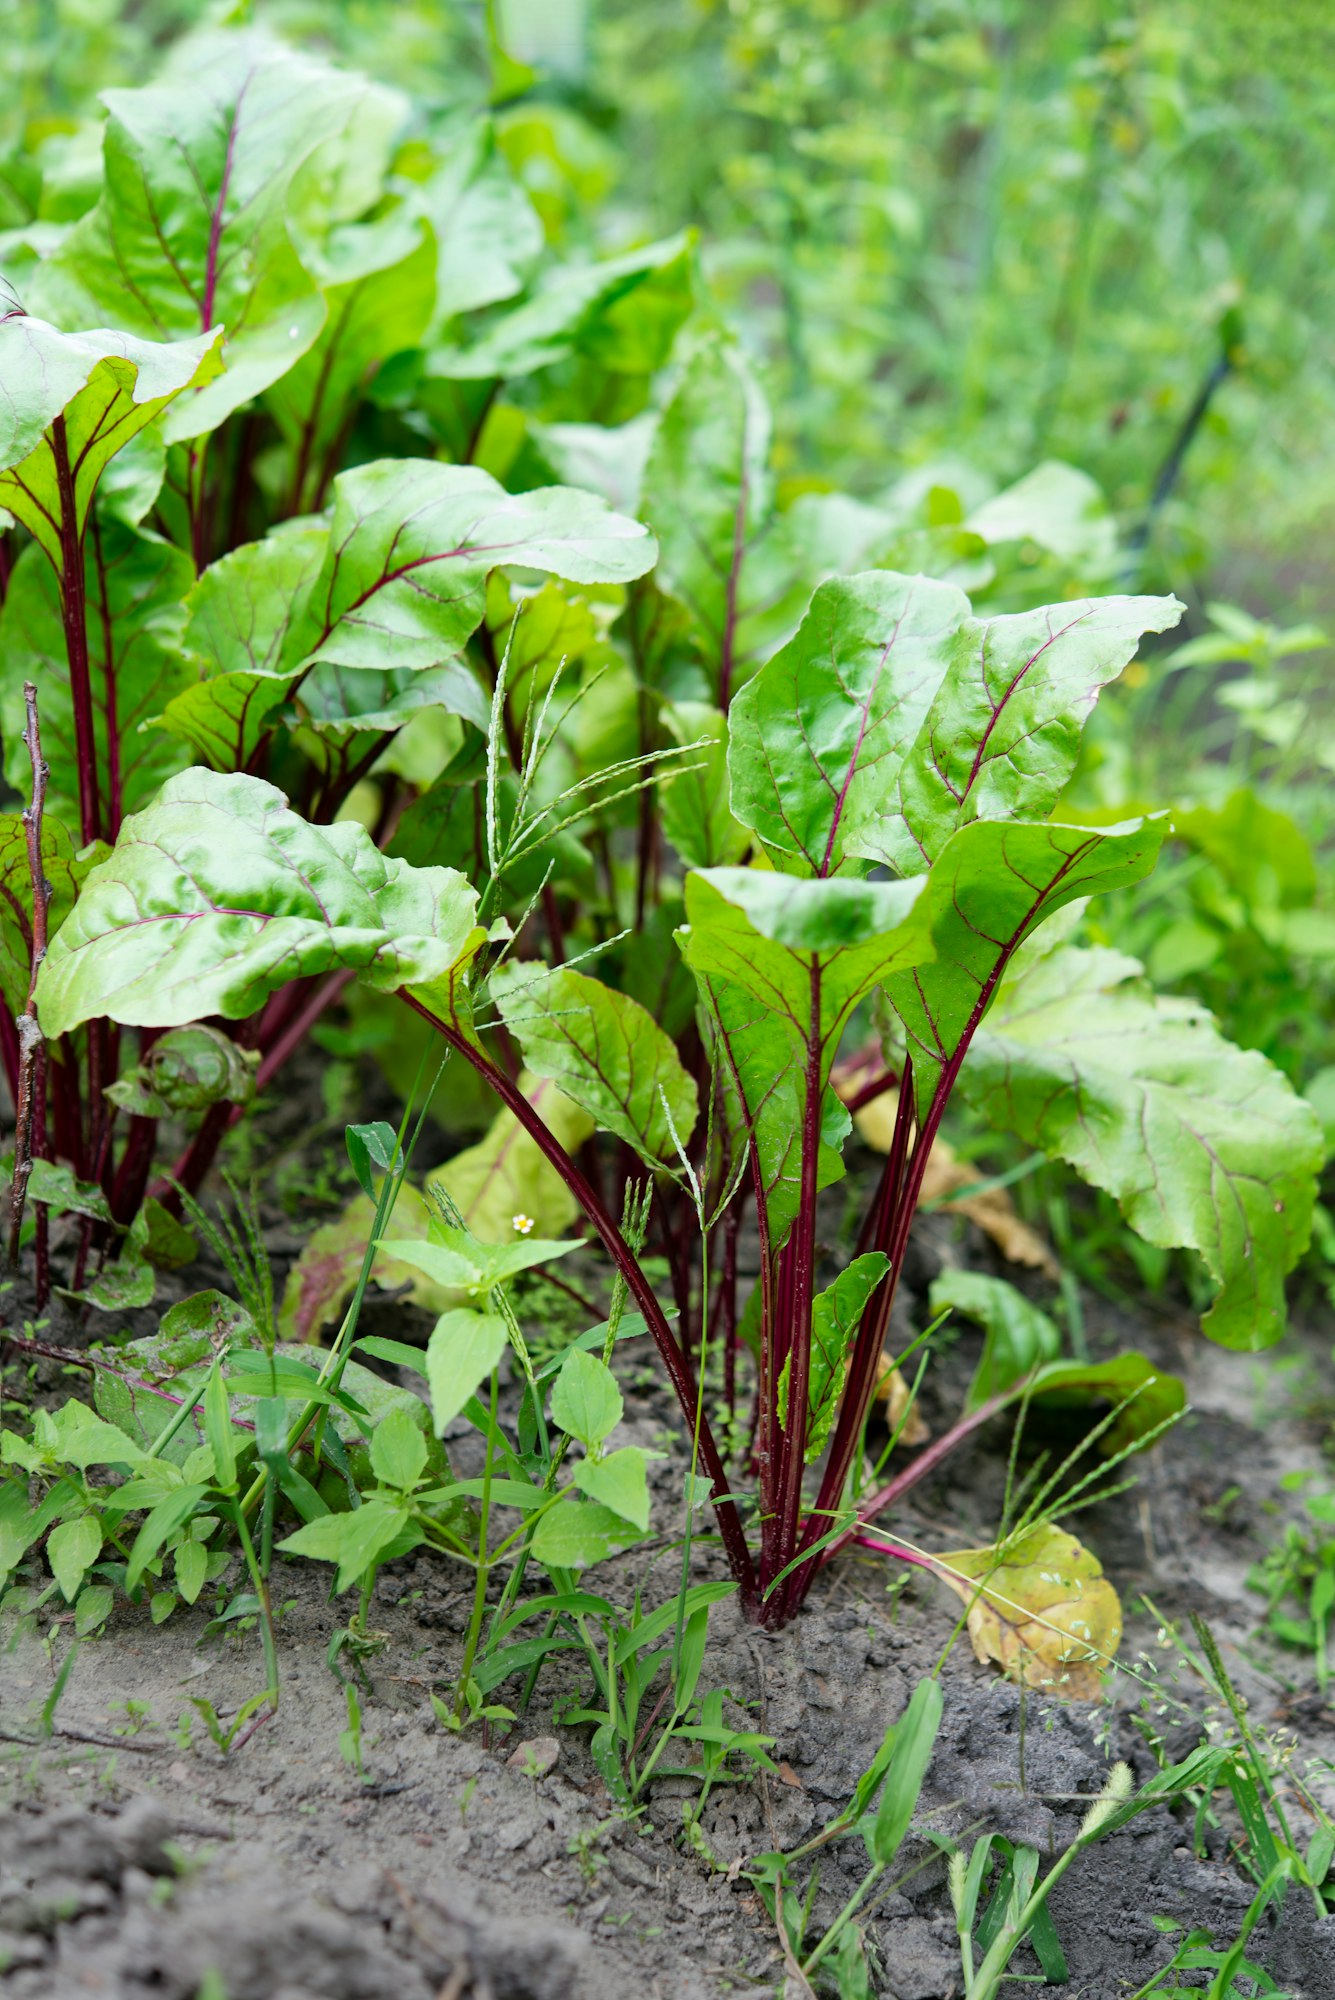 Caring for Your Beet Plants